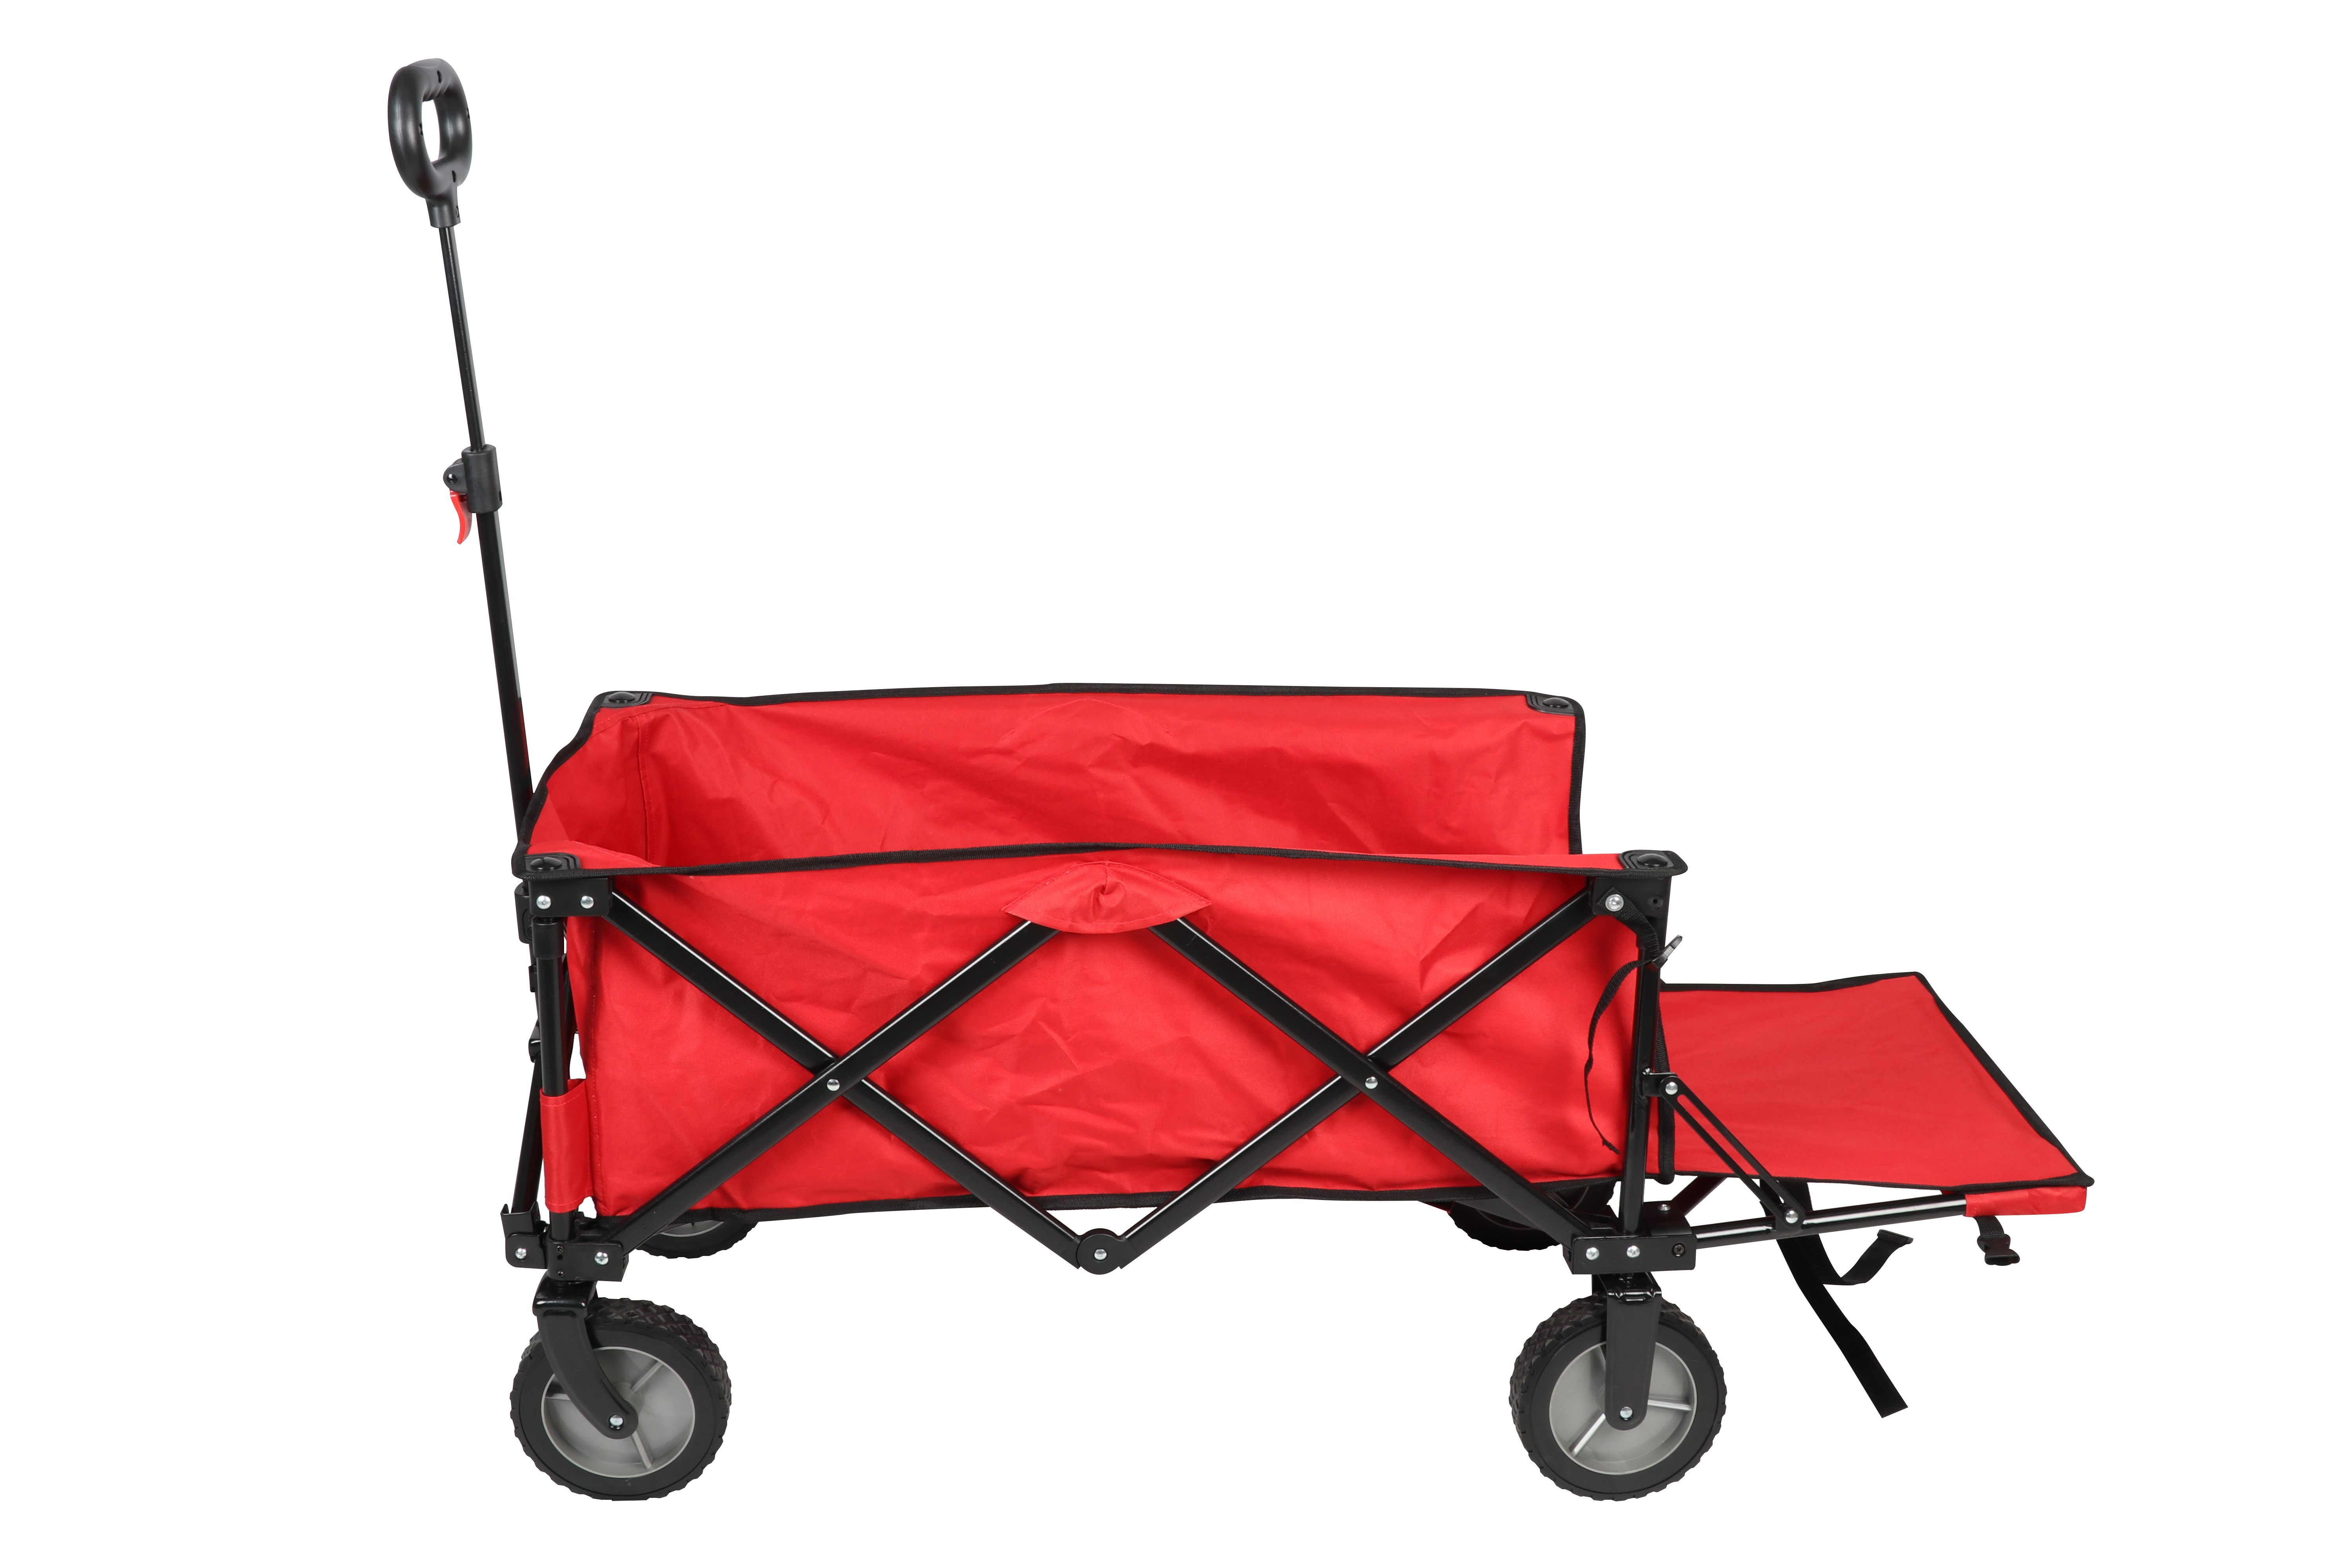 Ozark Trail Camping Utility Wagon with Tailgate & Extension Handle, Red, Polyester - image 5 of 8